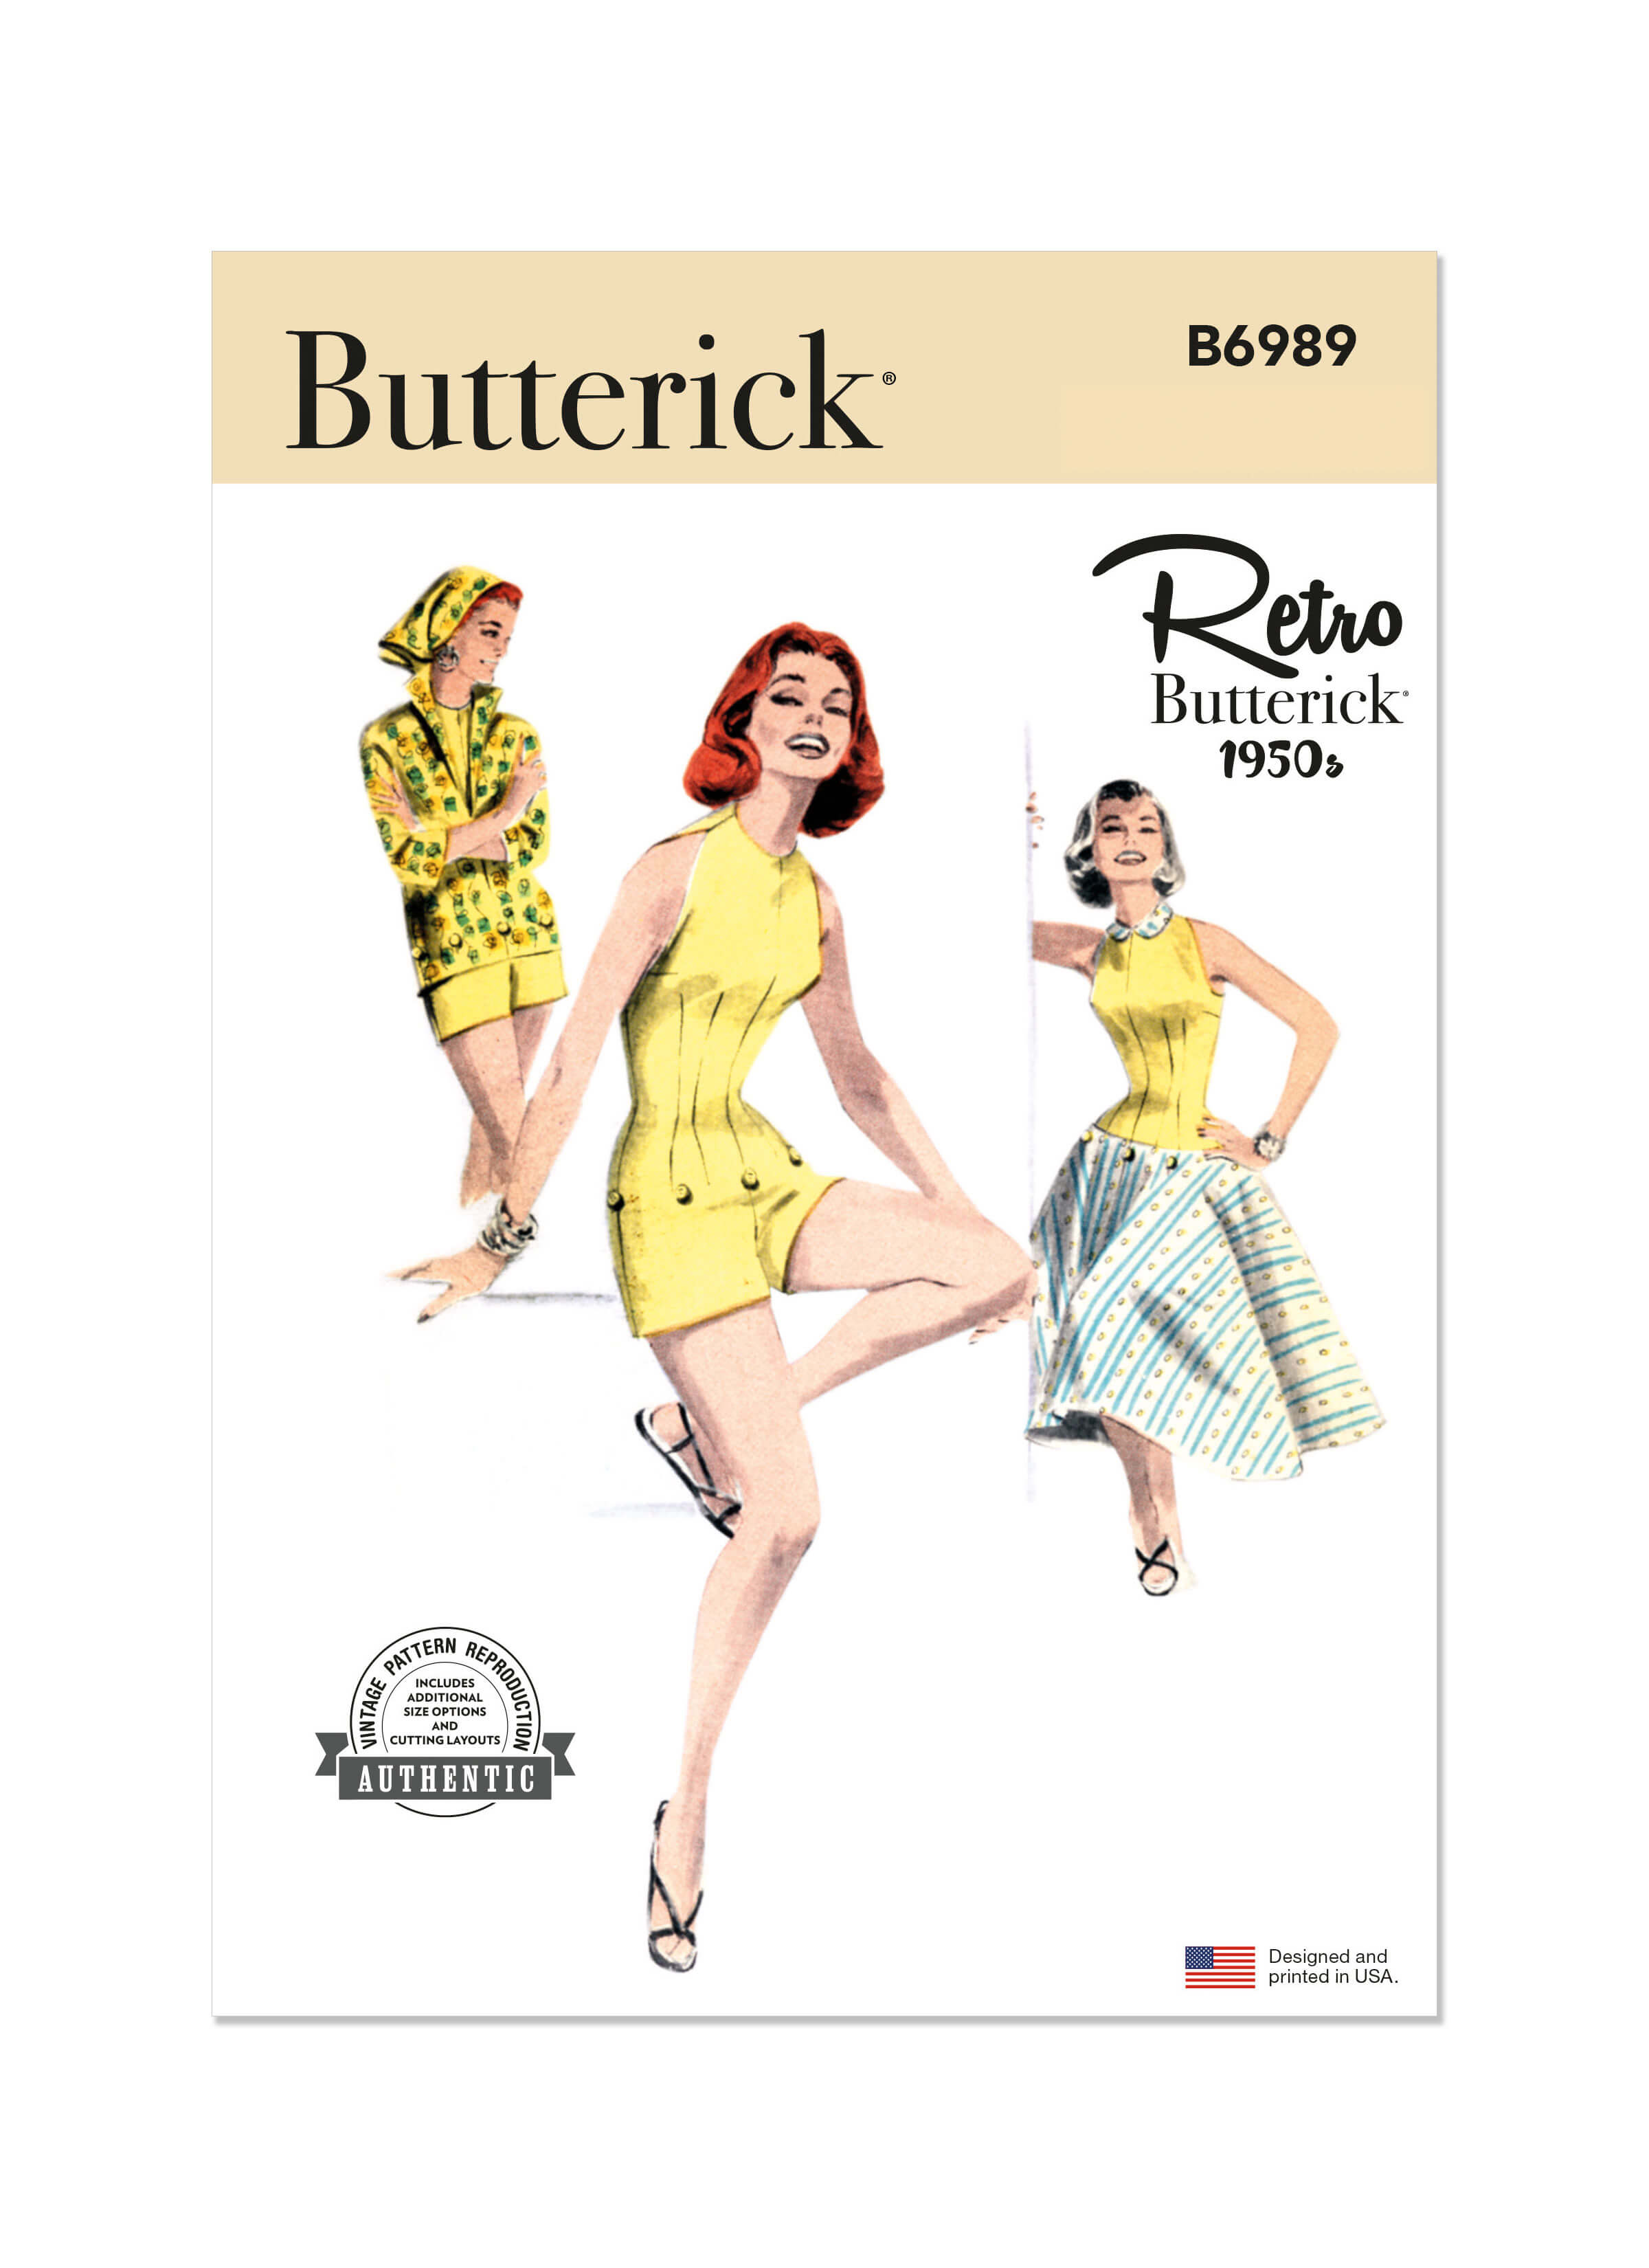 Butterick Sewing Pattern B6989 Misses' Playsuit, Blouse and Skirt